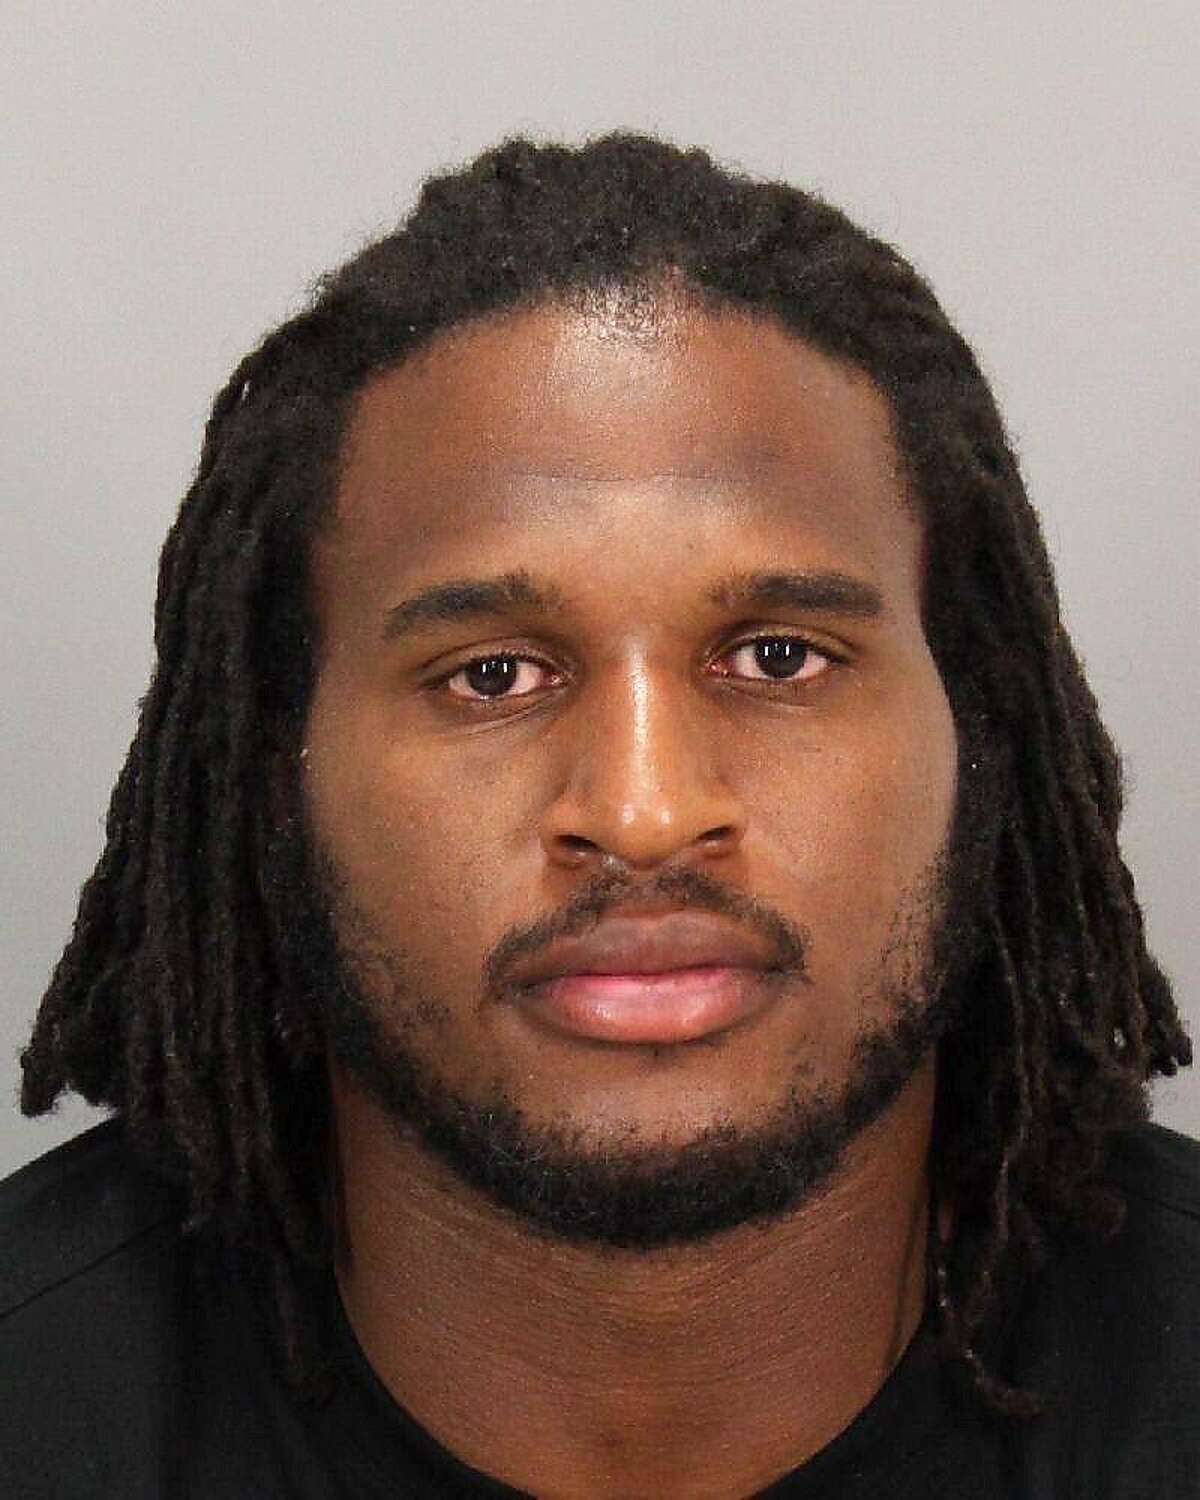 San Francisco 49er defensive end Ray McDonald is seen in an undated photo provided by the San Jose Police Department. McDonald, 29, was arrested early Sunday, Aug. 31, 2014 by San Jose Police on felony domestic violence charges. San Jose police Sgt. Heather Randol says McDonald was taken into custody after officers responded to a home in an upscale neighborhood. (AP Photo/San Jose Police Department)